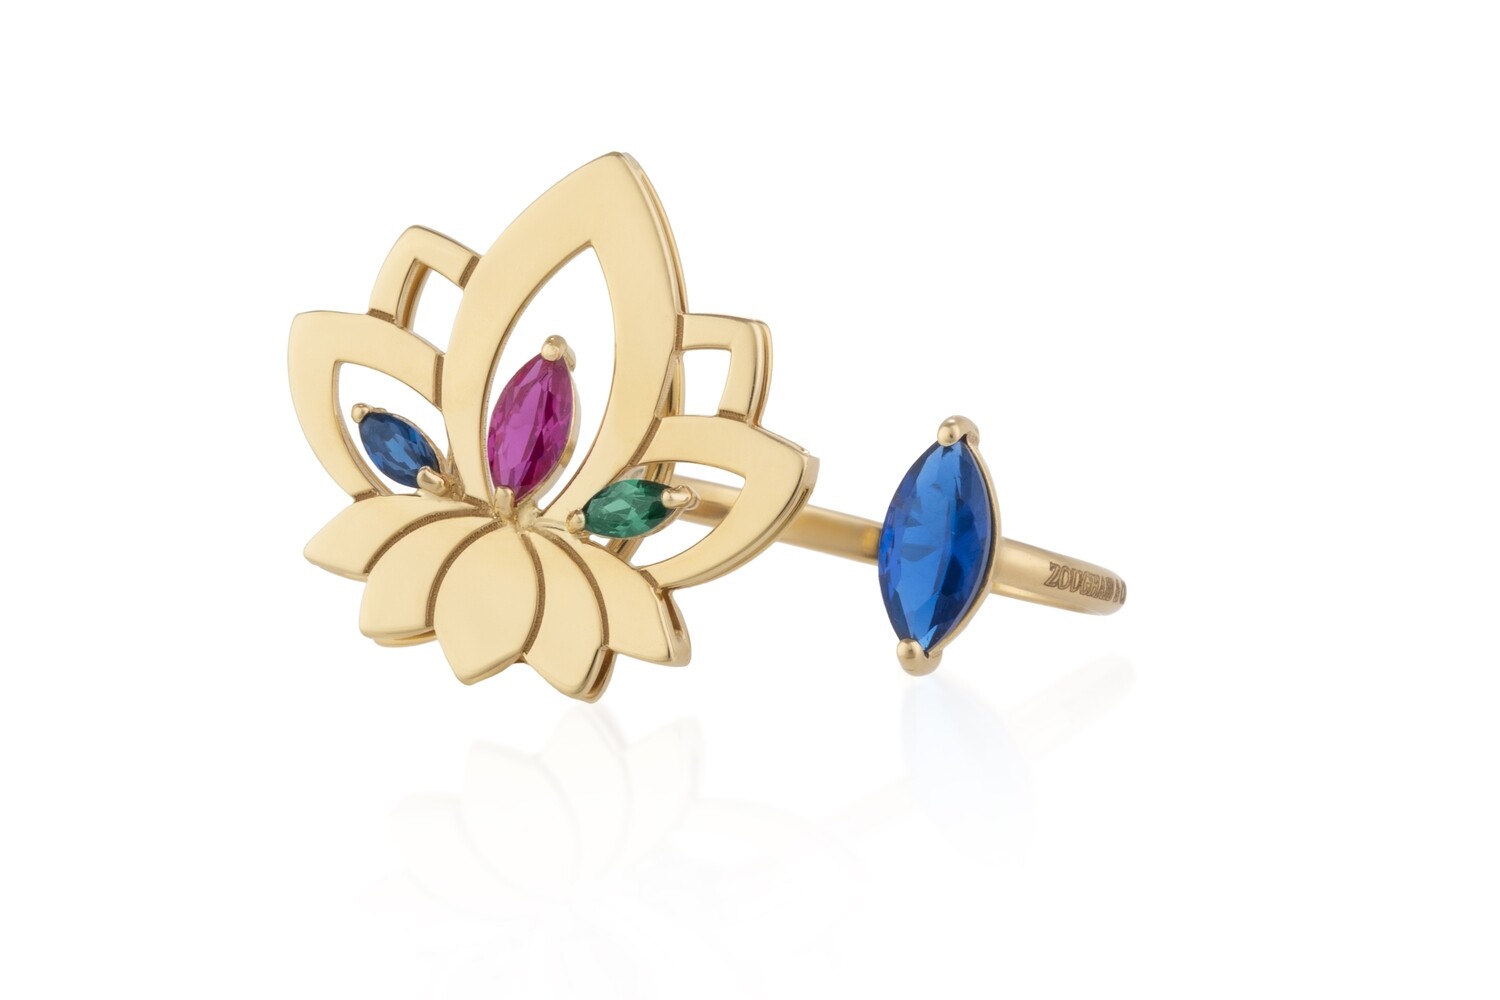 Lotus Gold Ring with Colored Stones